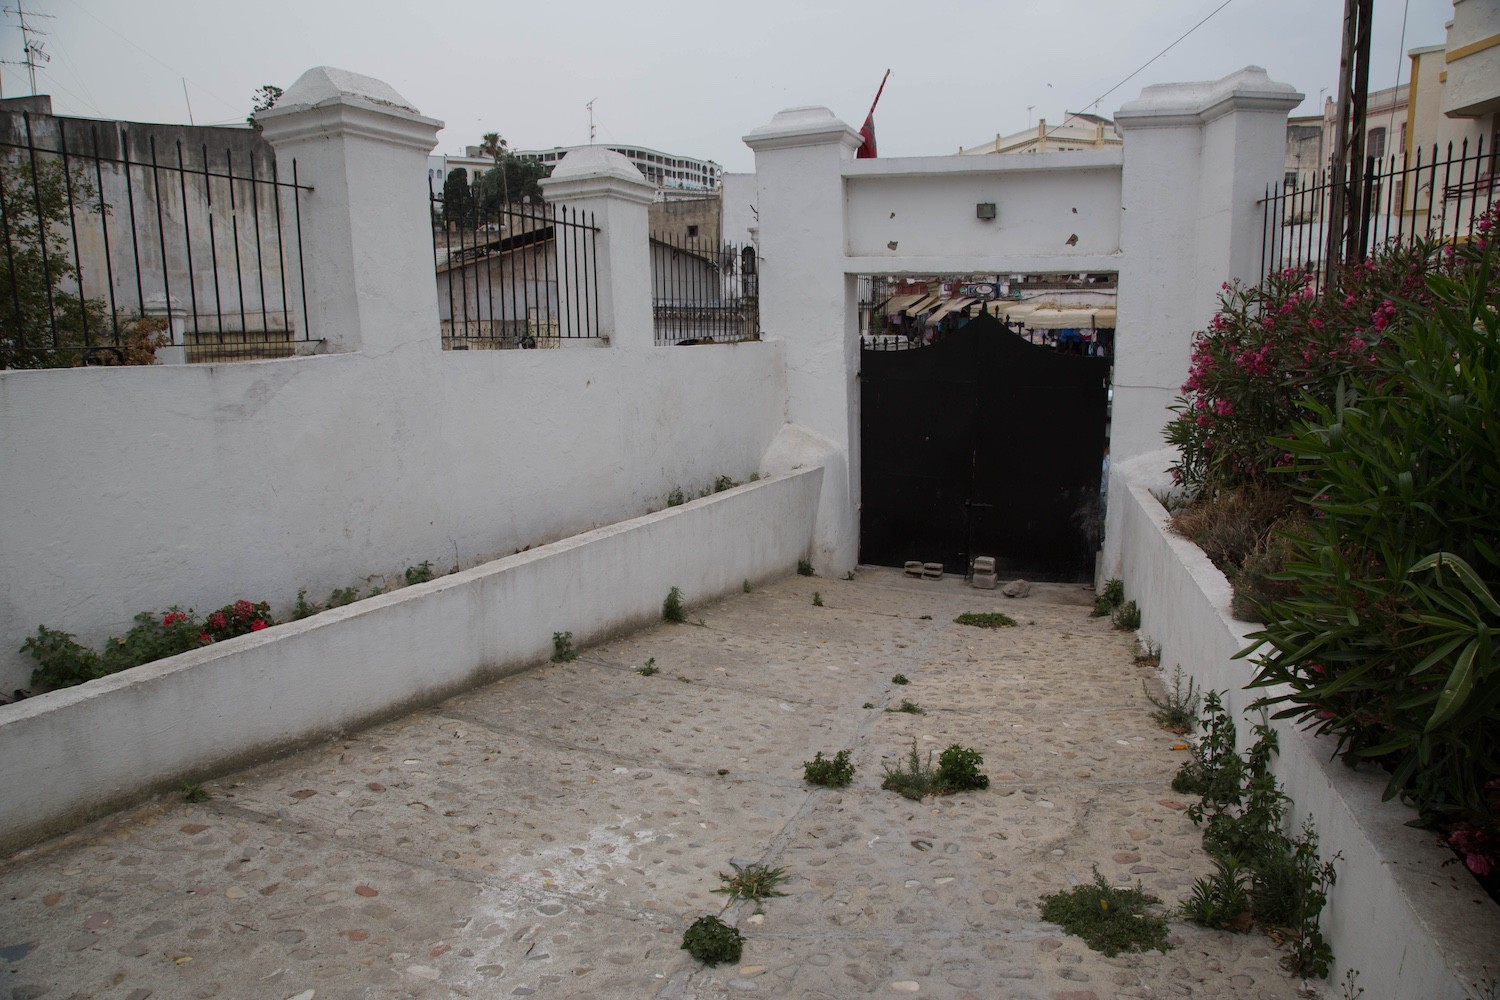 Jewish Cemetery of Tangier - View from inside the cemetery tword the cemetery gate